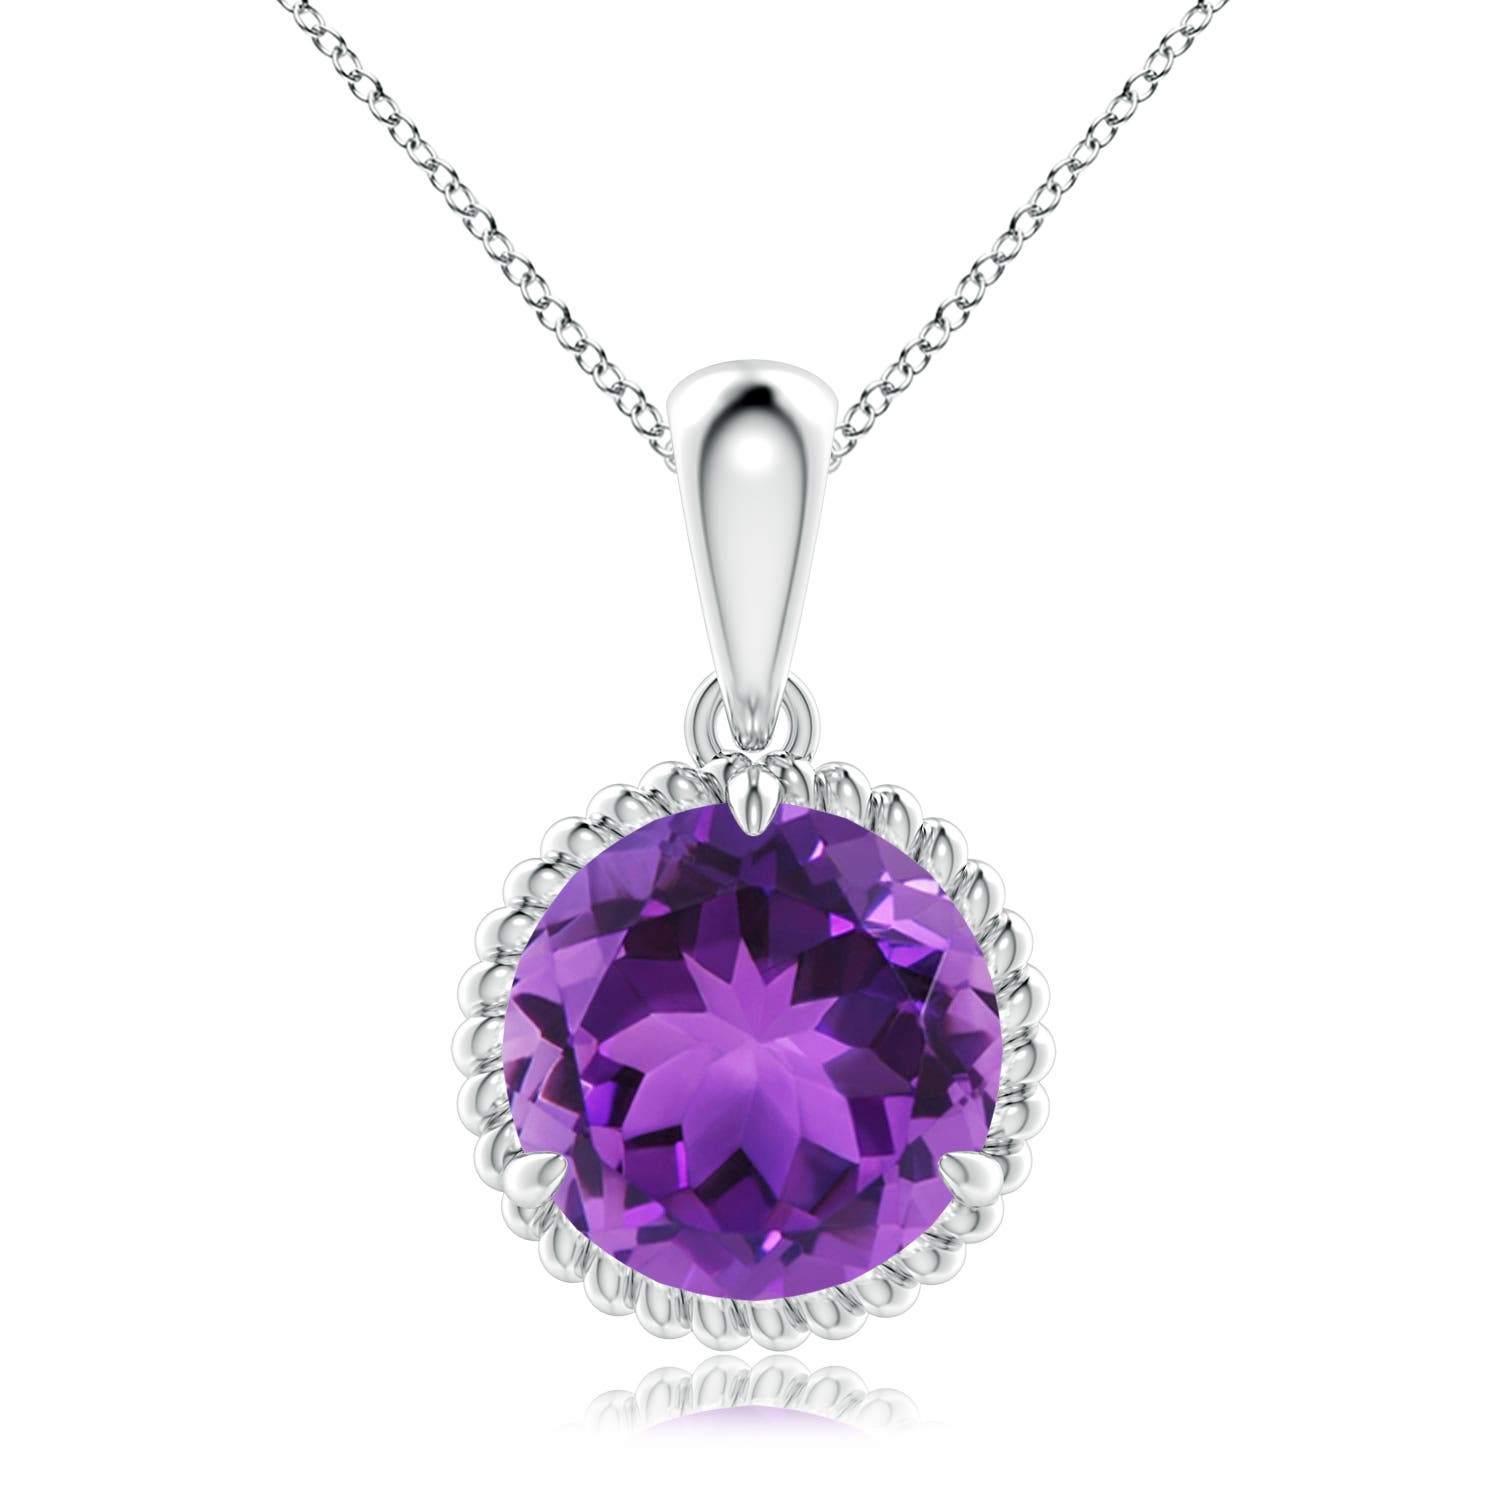 AAA - Amethyst / 3.2 CT / 14 KT White Gold